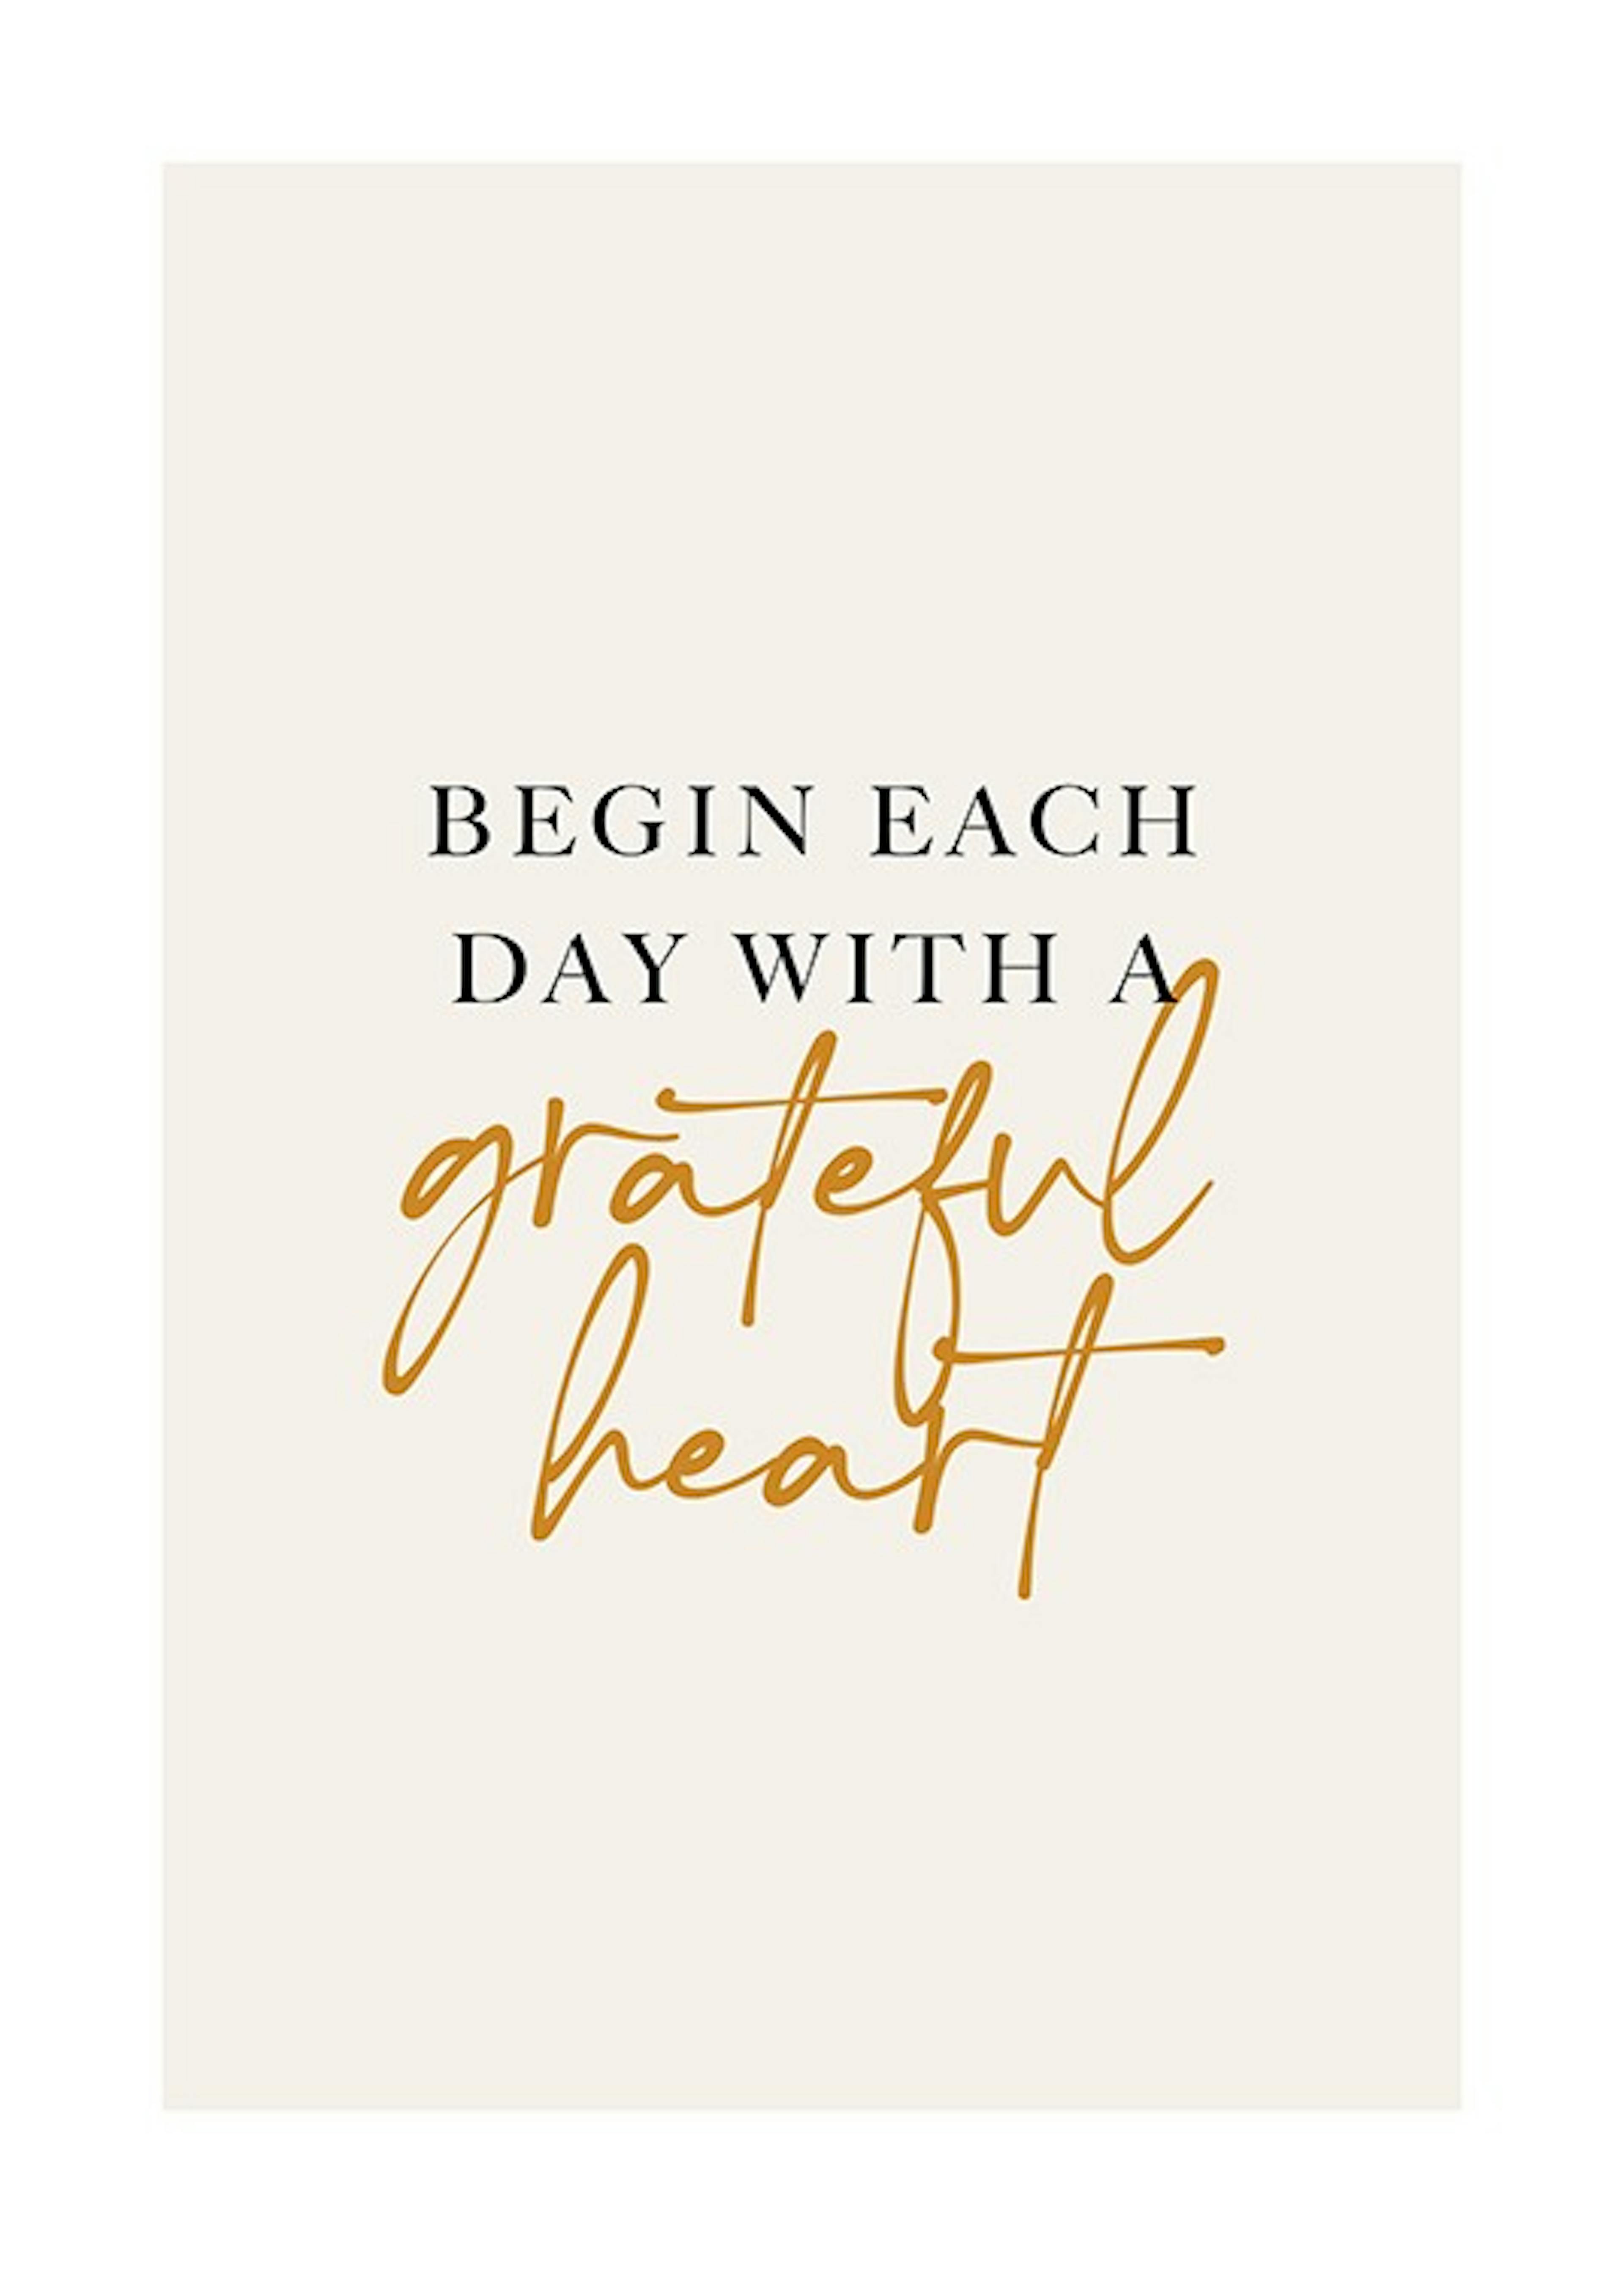 With a Grateful Heart Print